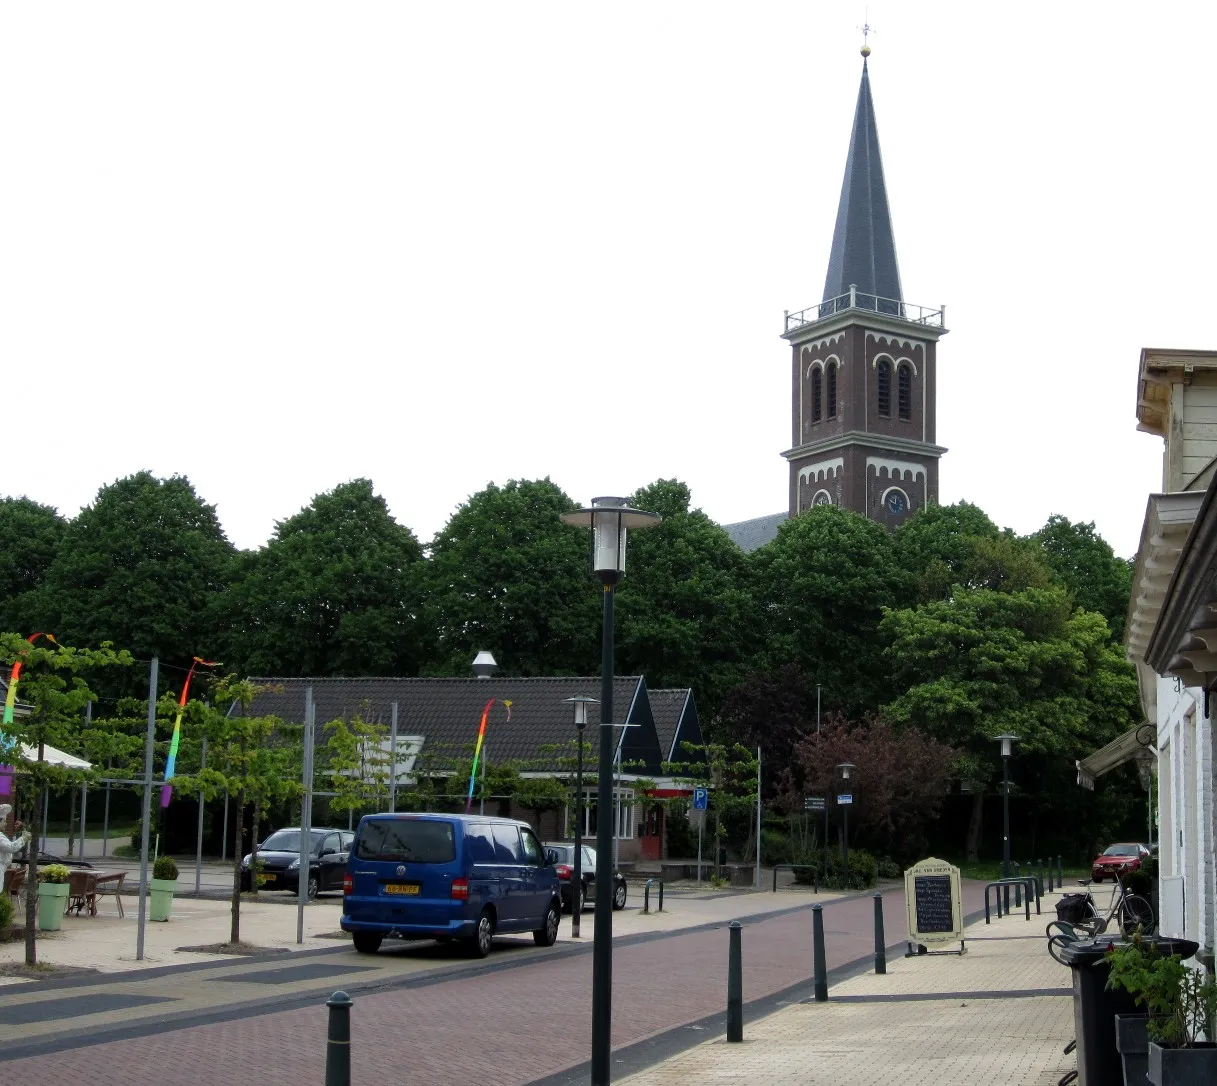 Photo showing: Greatebuorren (street) in the village of Menaam (Menaldum), Friesland, the Netherlands, with the church tower in the background.